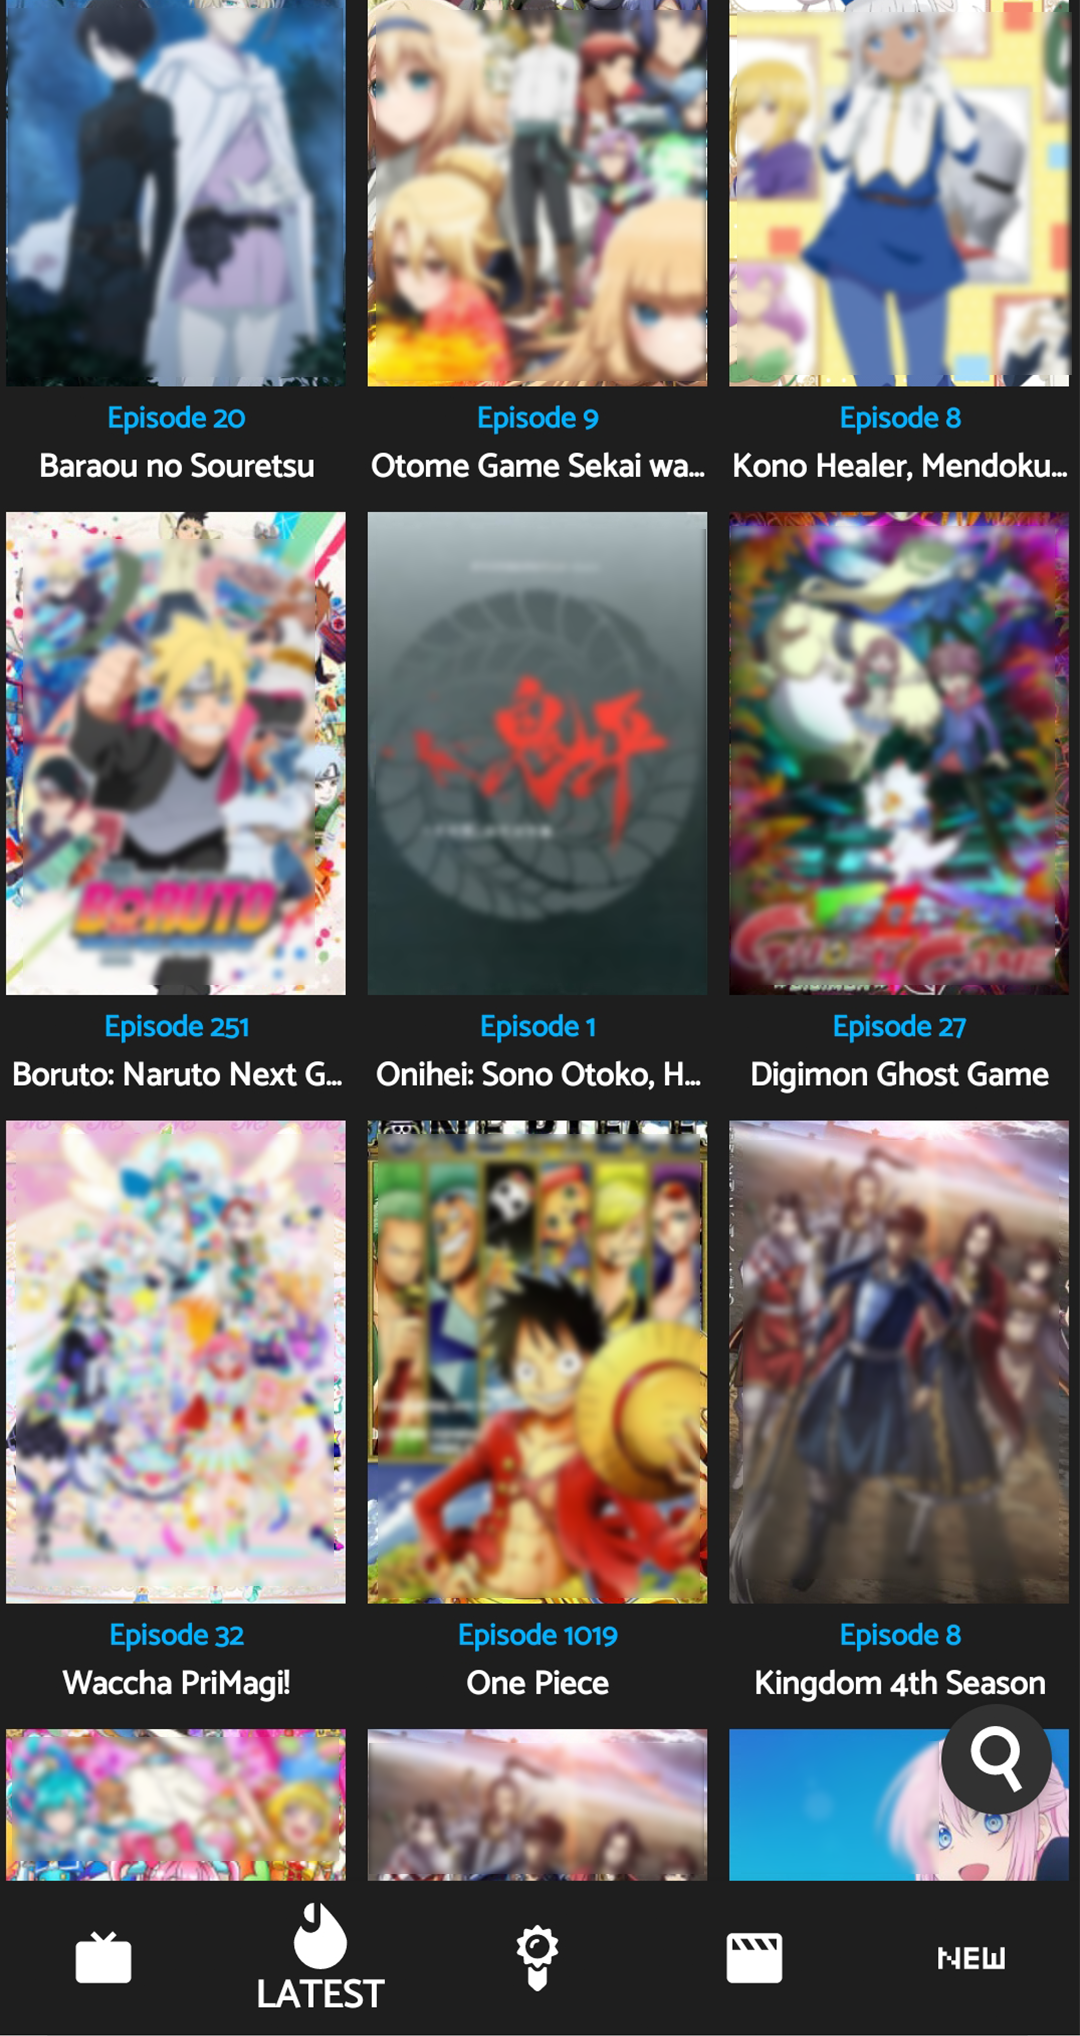 Download GoGoAnime Anime Online APK for Android, Run on PC and Mac